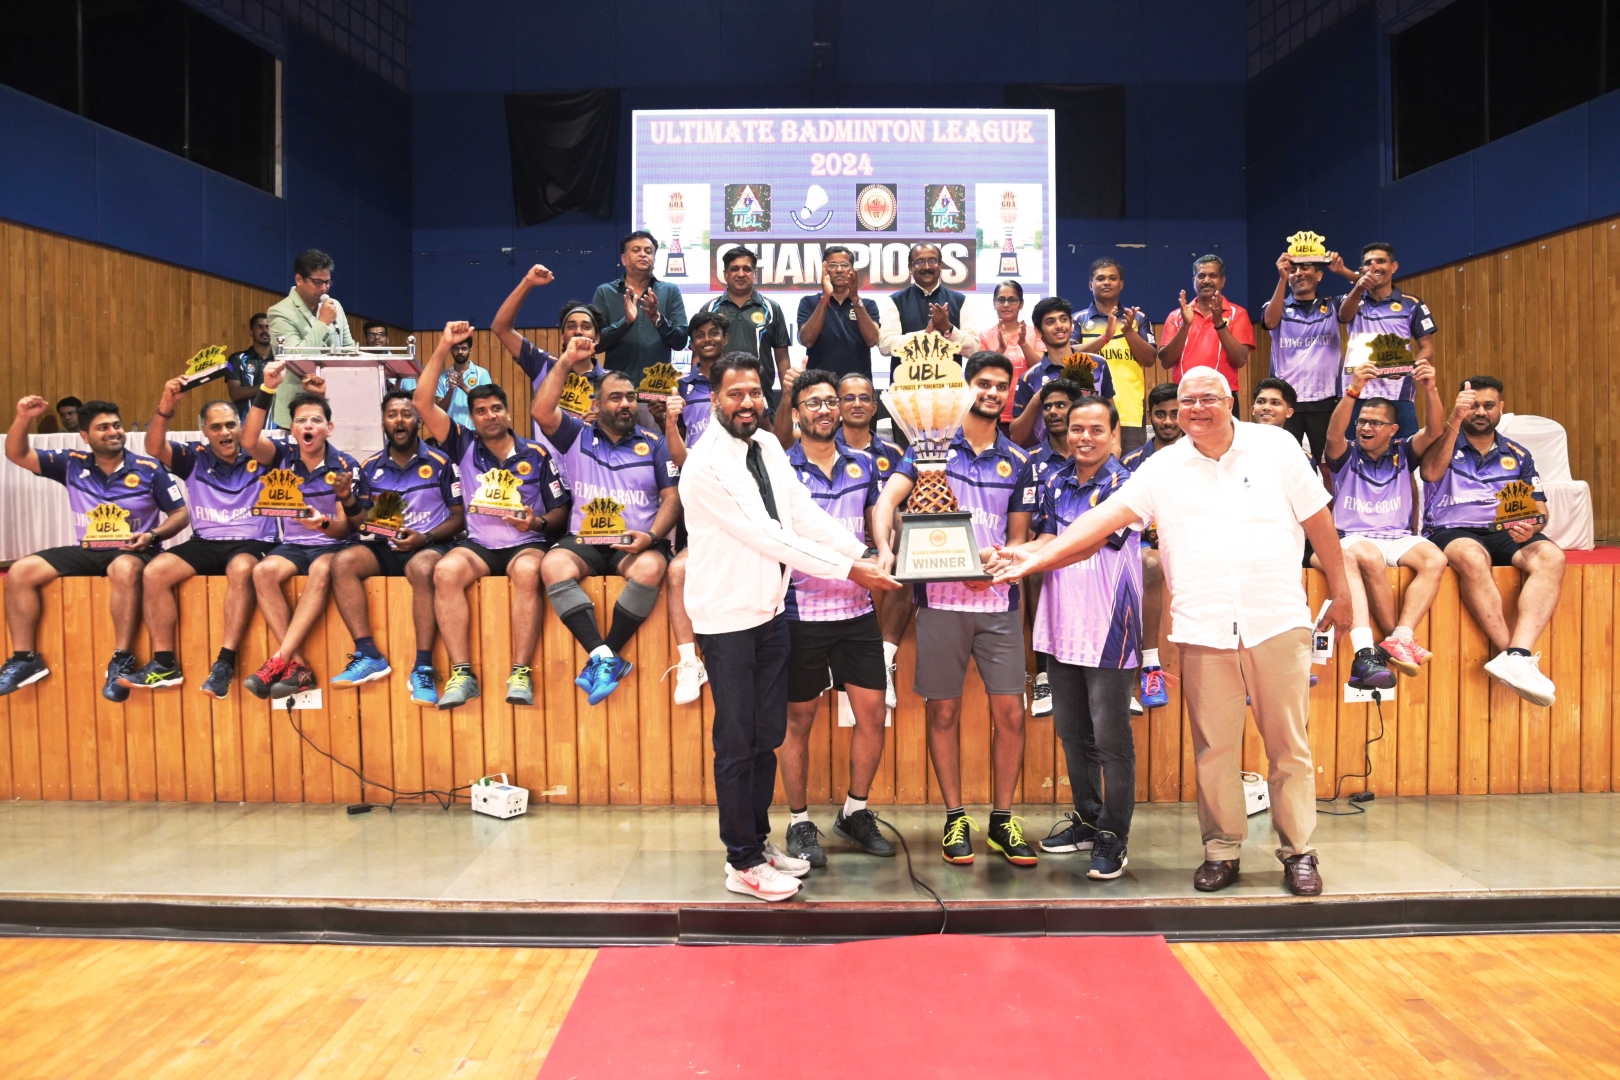 Ultimate Badminton League: Flying Gravity claim title, Sparkling Stars runners-up